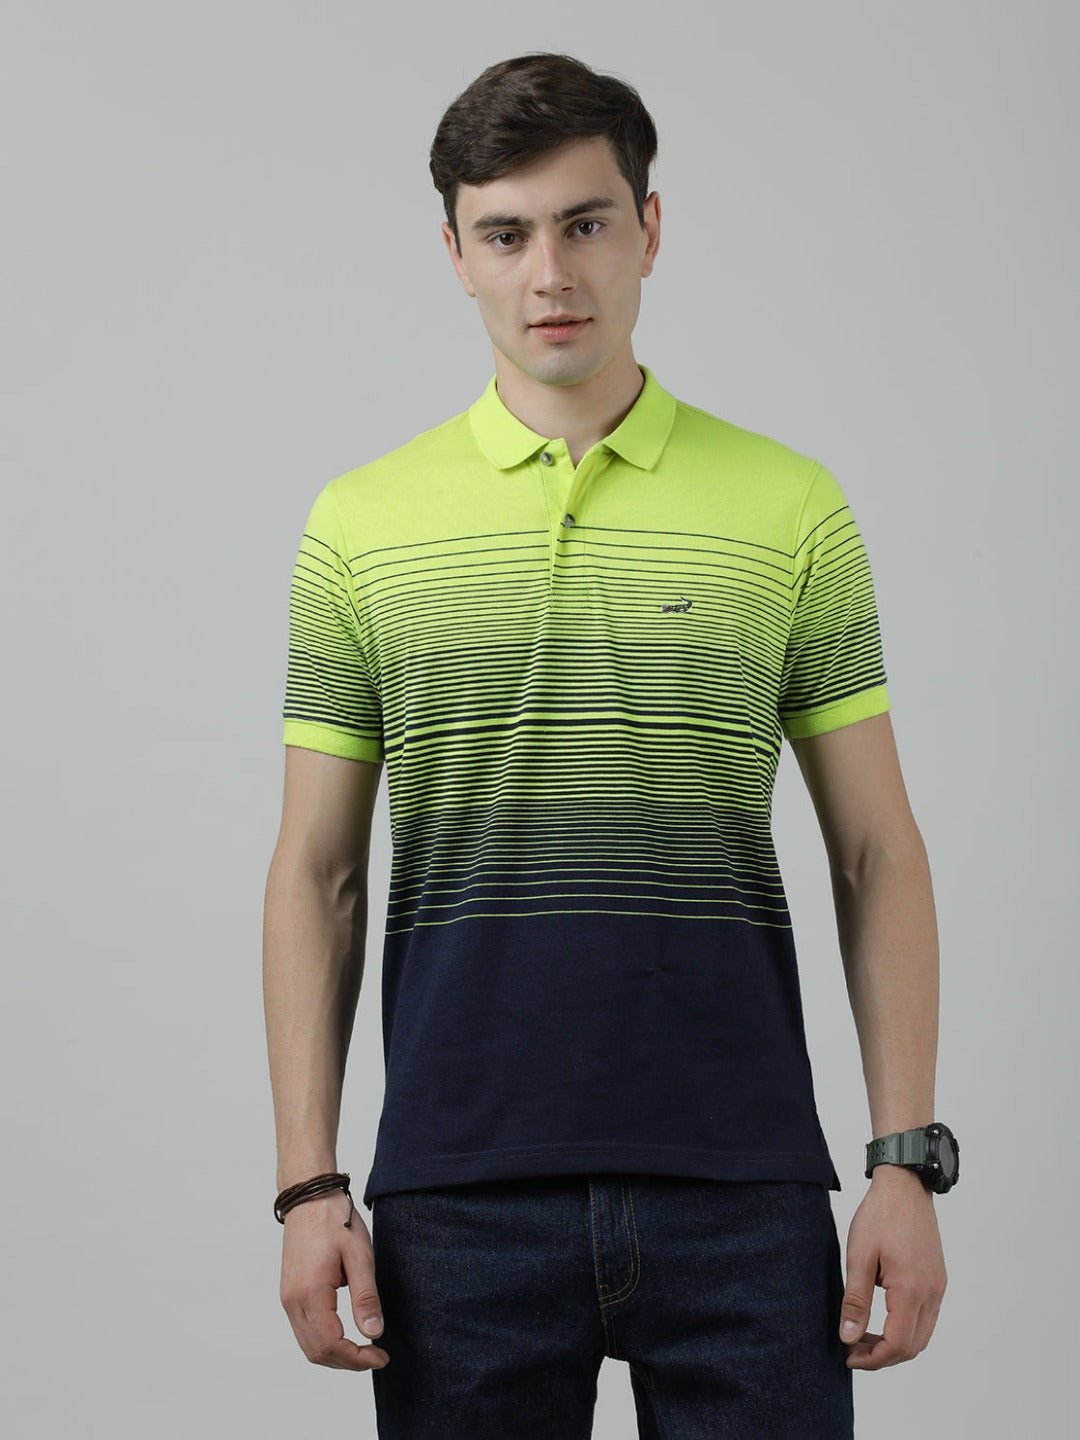 Casual Blue T-Shirt Half Sleeve Slim Fit Jersey Engineering Stripe with Collar for Men